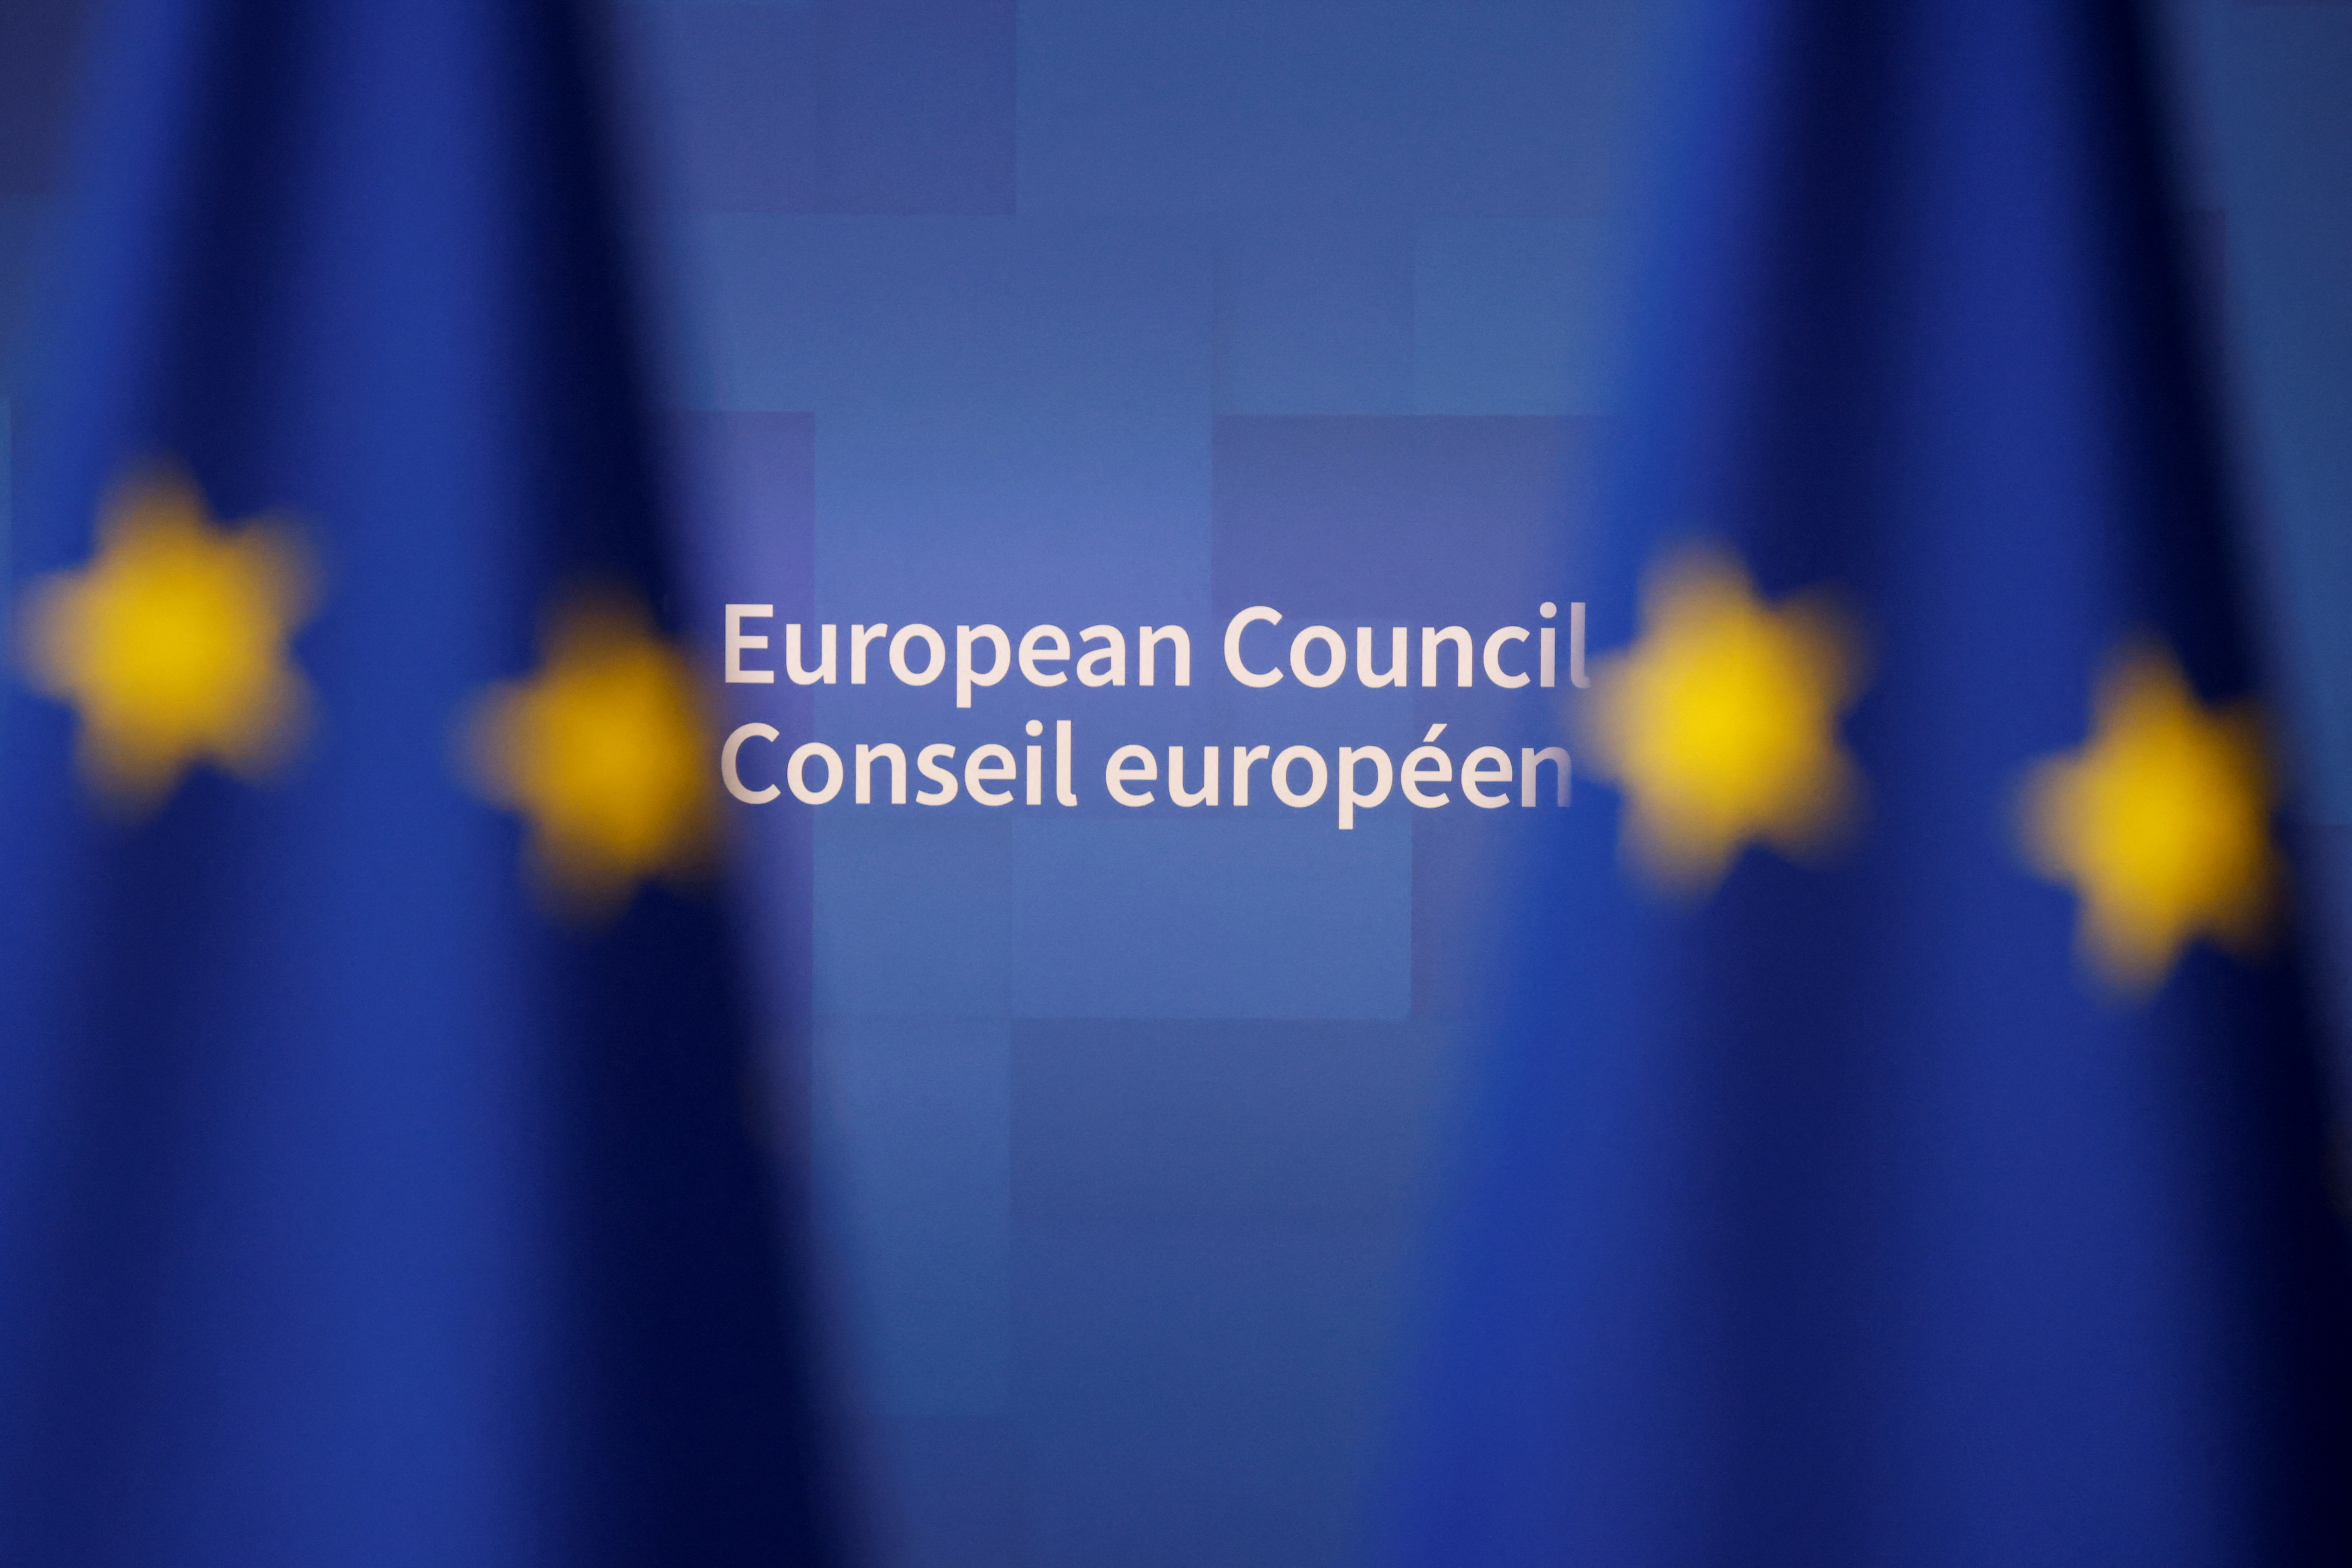 A view shows the logo of the European Council in Brussels